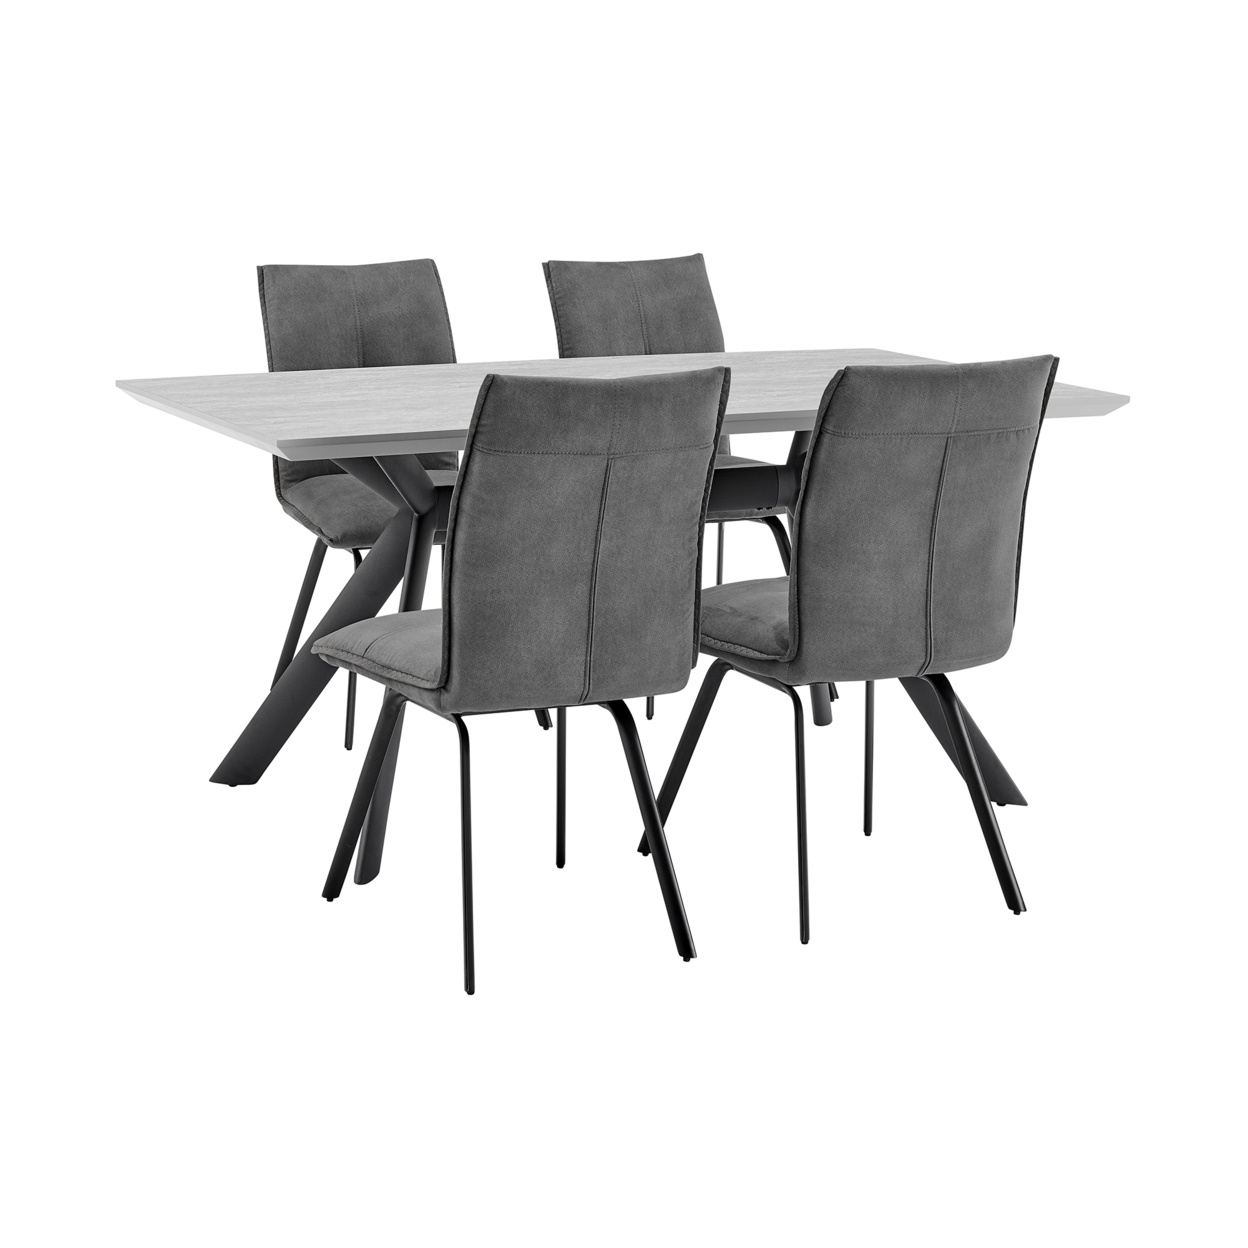 5 Piece Dining Table And Pillow Top Fabric Chairs, Charcoal Gray- Saltoro Sherpi